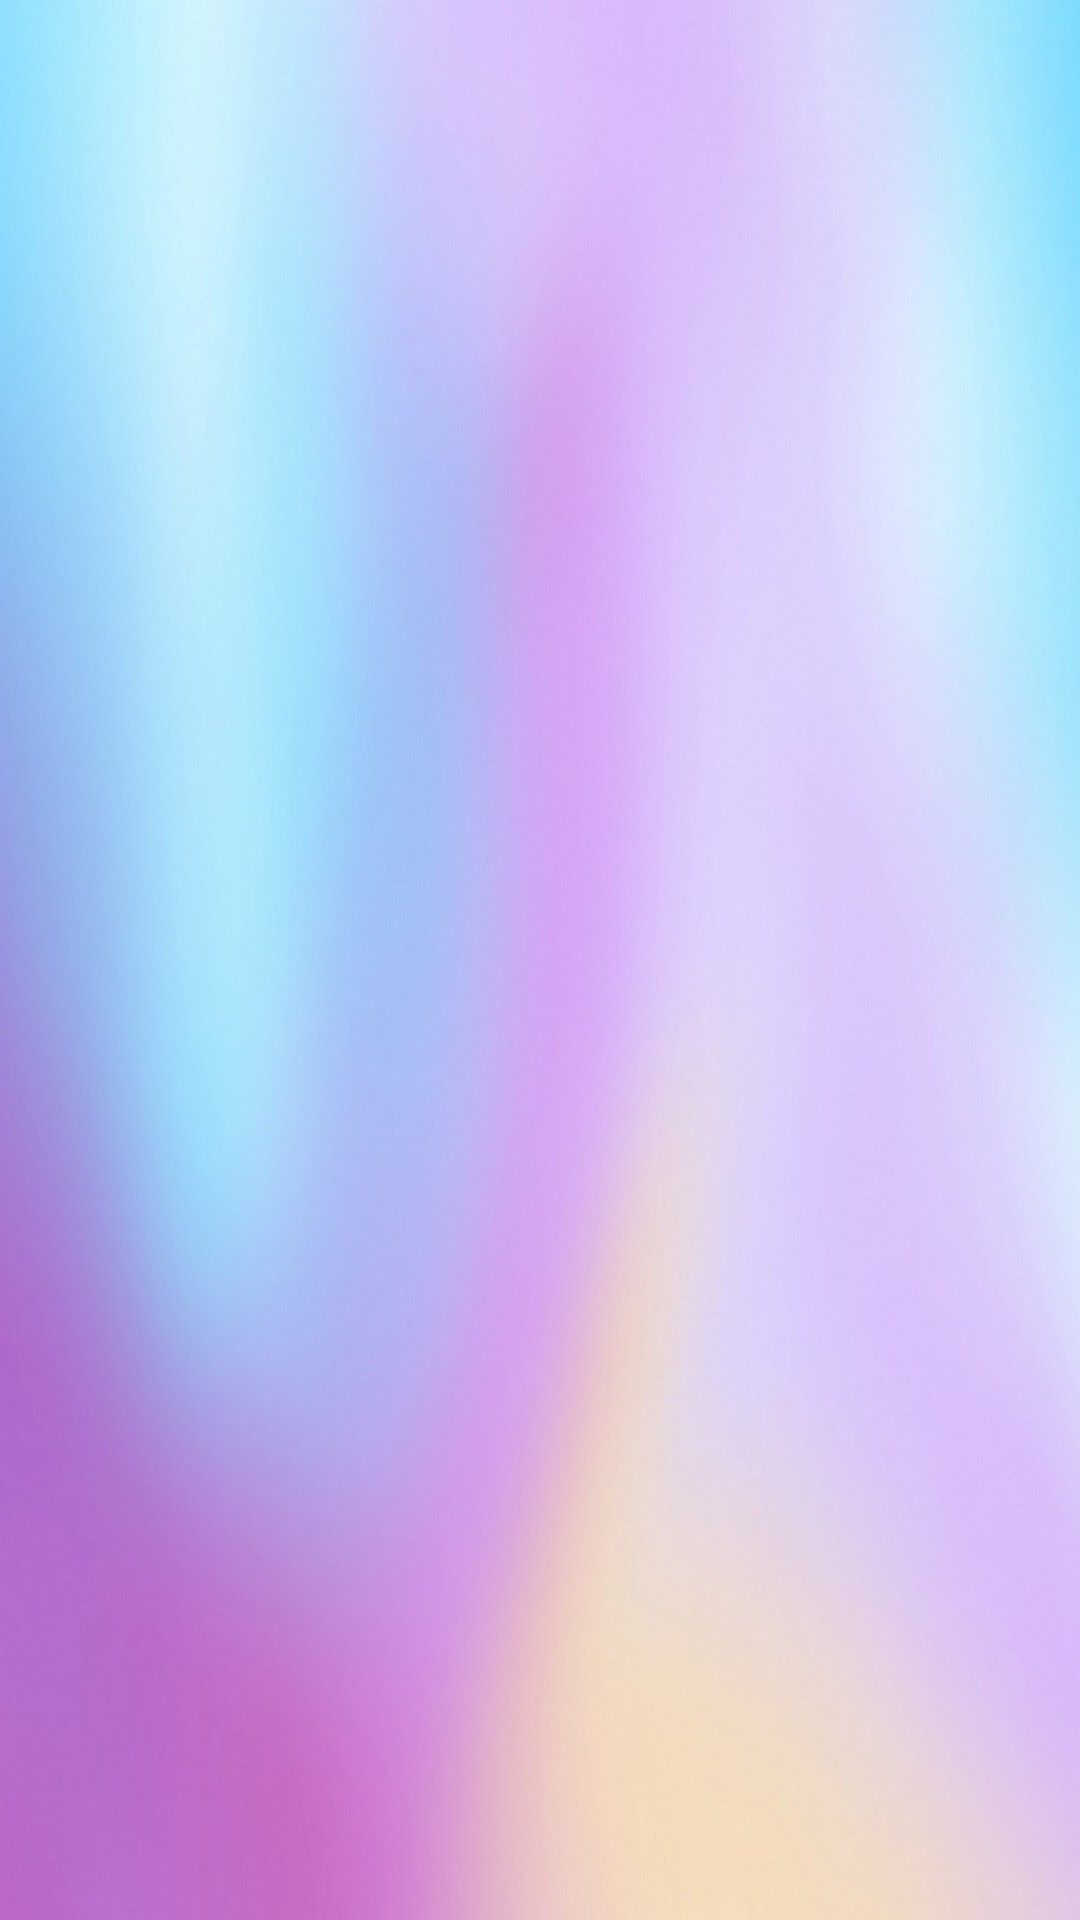 Gradient Desktop Wallpaper With high-resolution 1080X1920 pixel. You can use this wallpaper for your Windows and Mac OS computers as well as your Android and iPhone smartphones